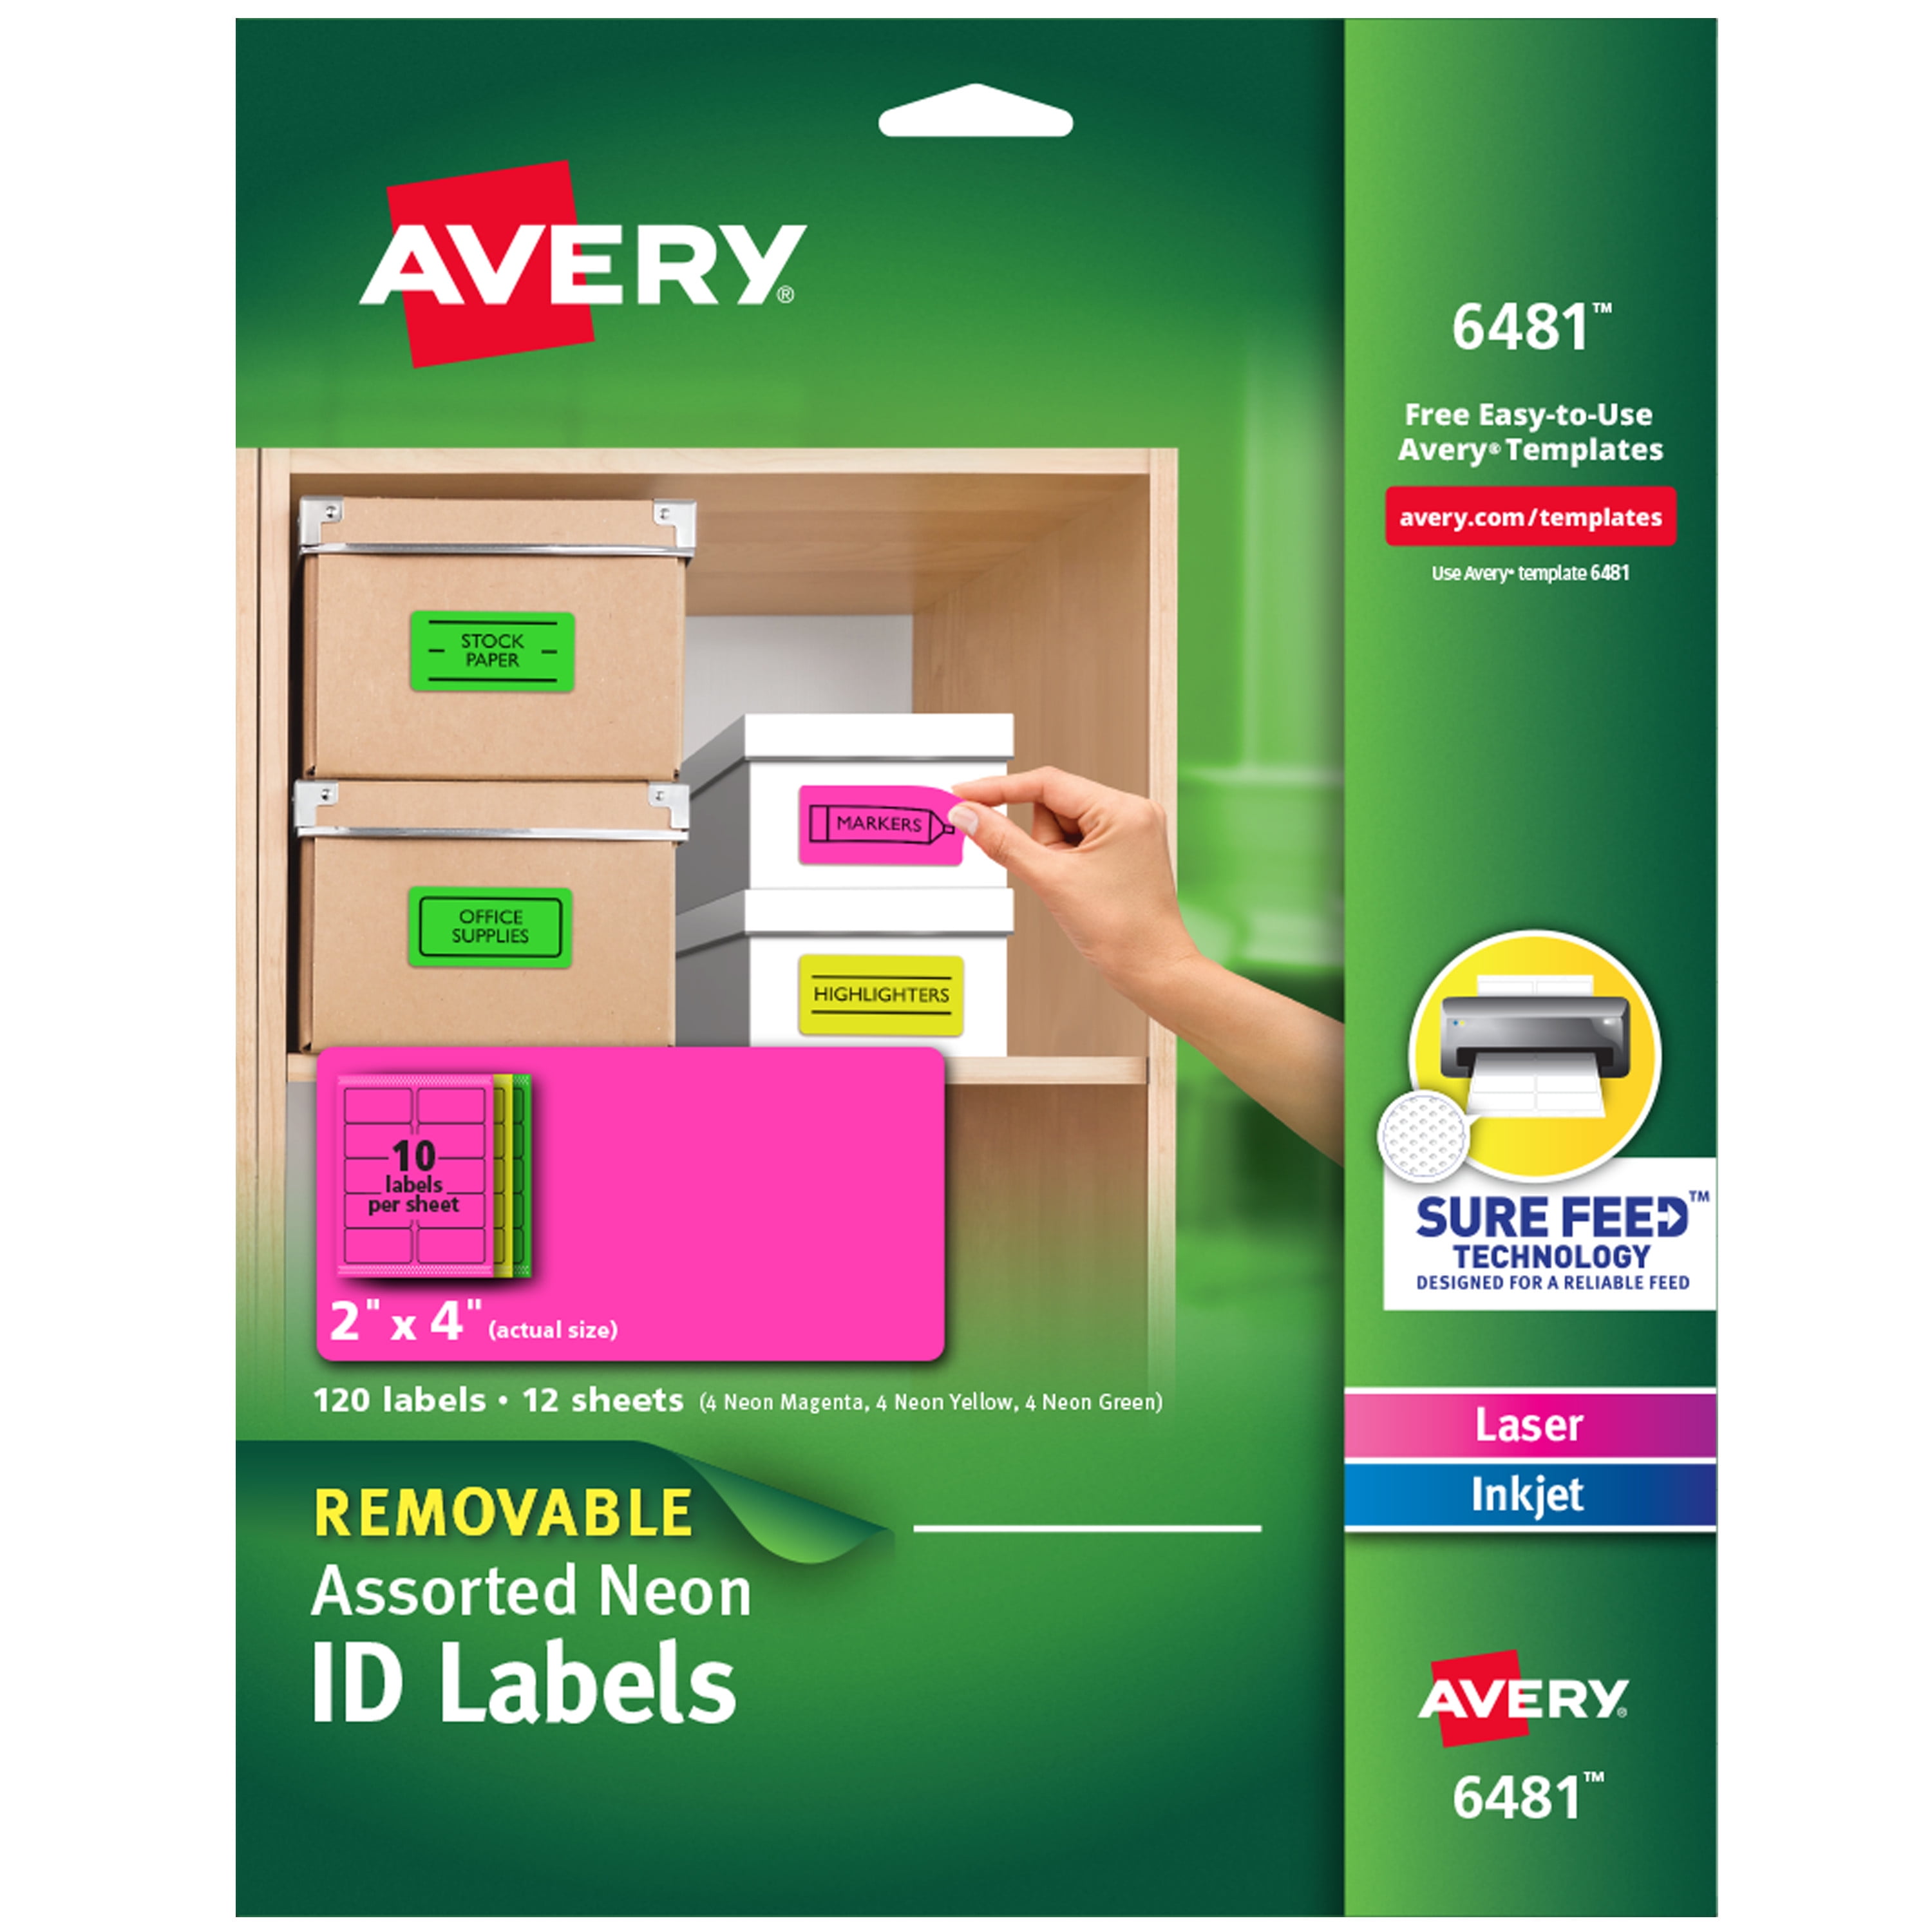 2 AVERY® Removable Moving Labels Color Coding Assort Colors Sizes Apartment 218 